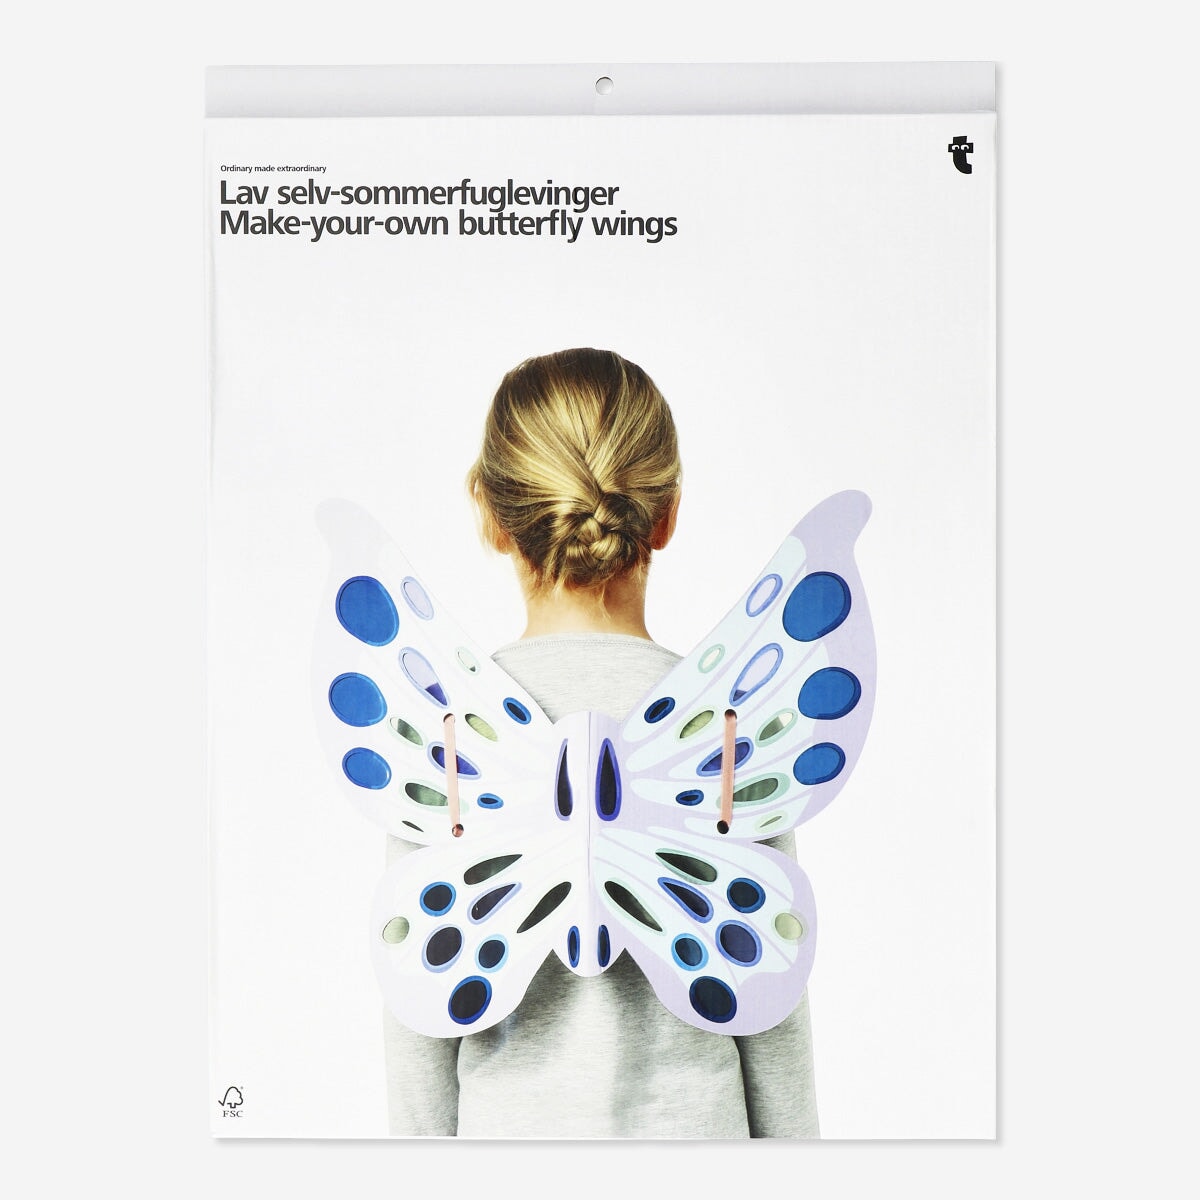 Make-your-own butterfly wings Hobby Flying Tiger Copenhagen 